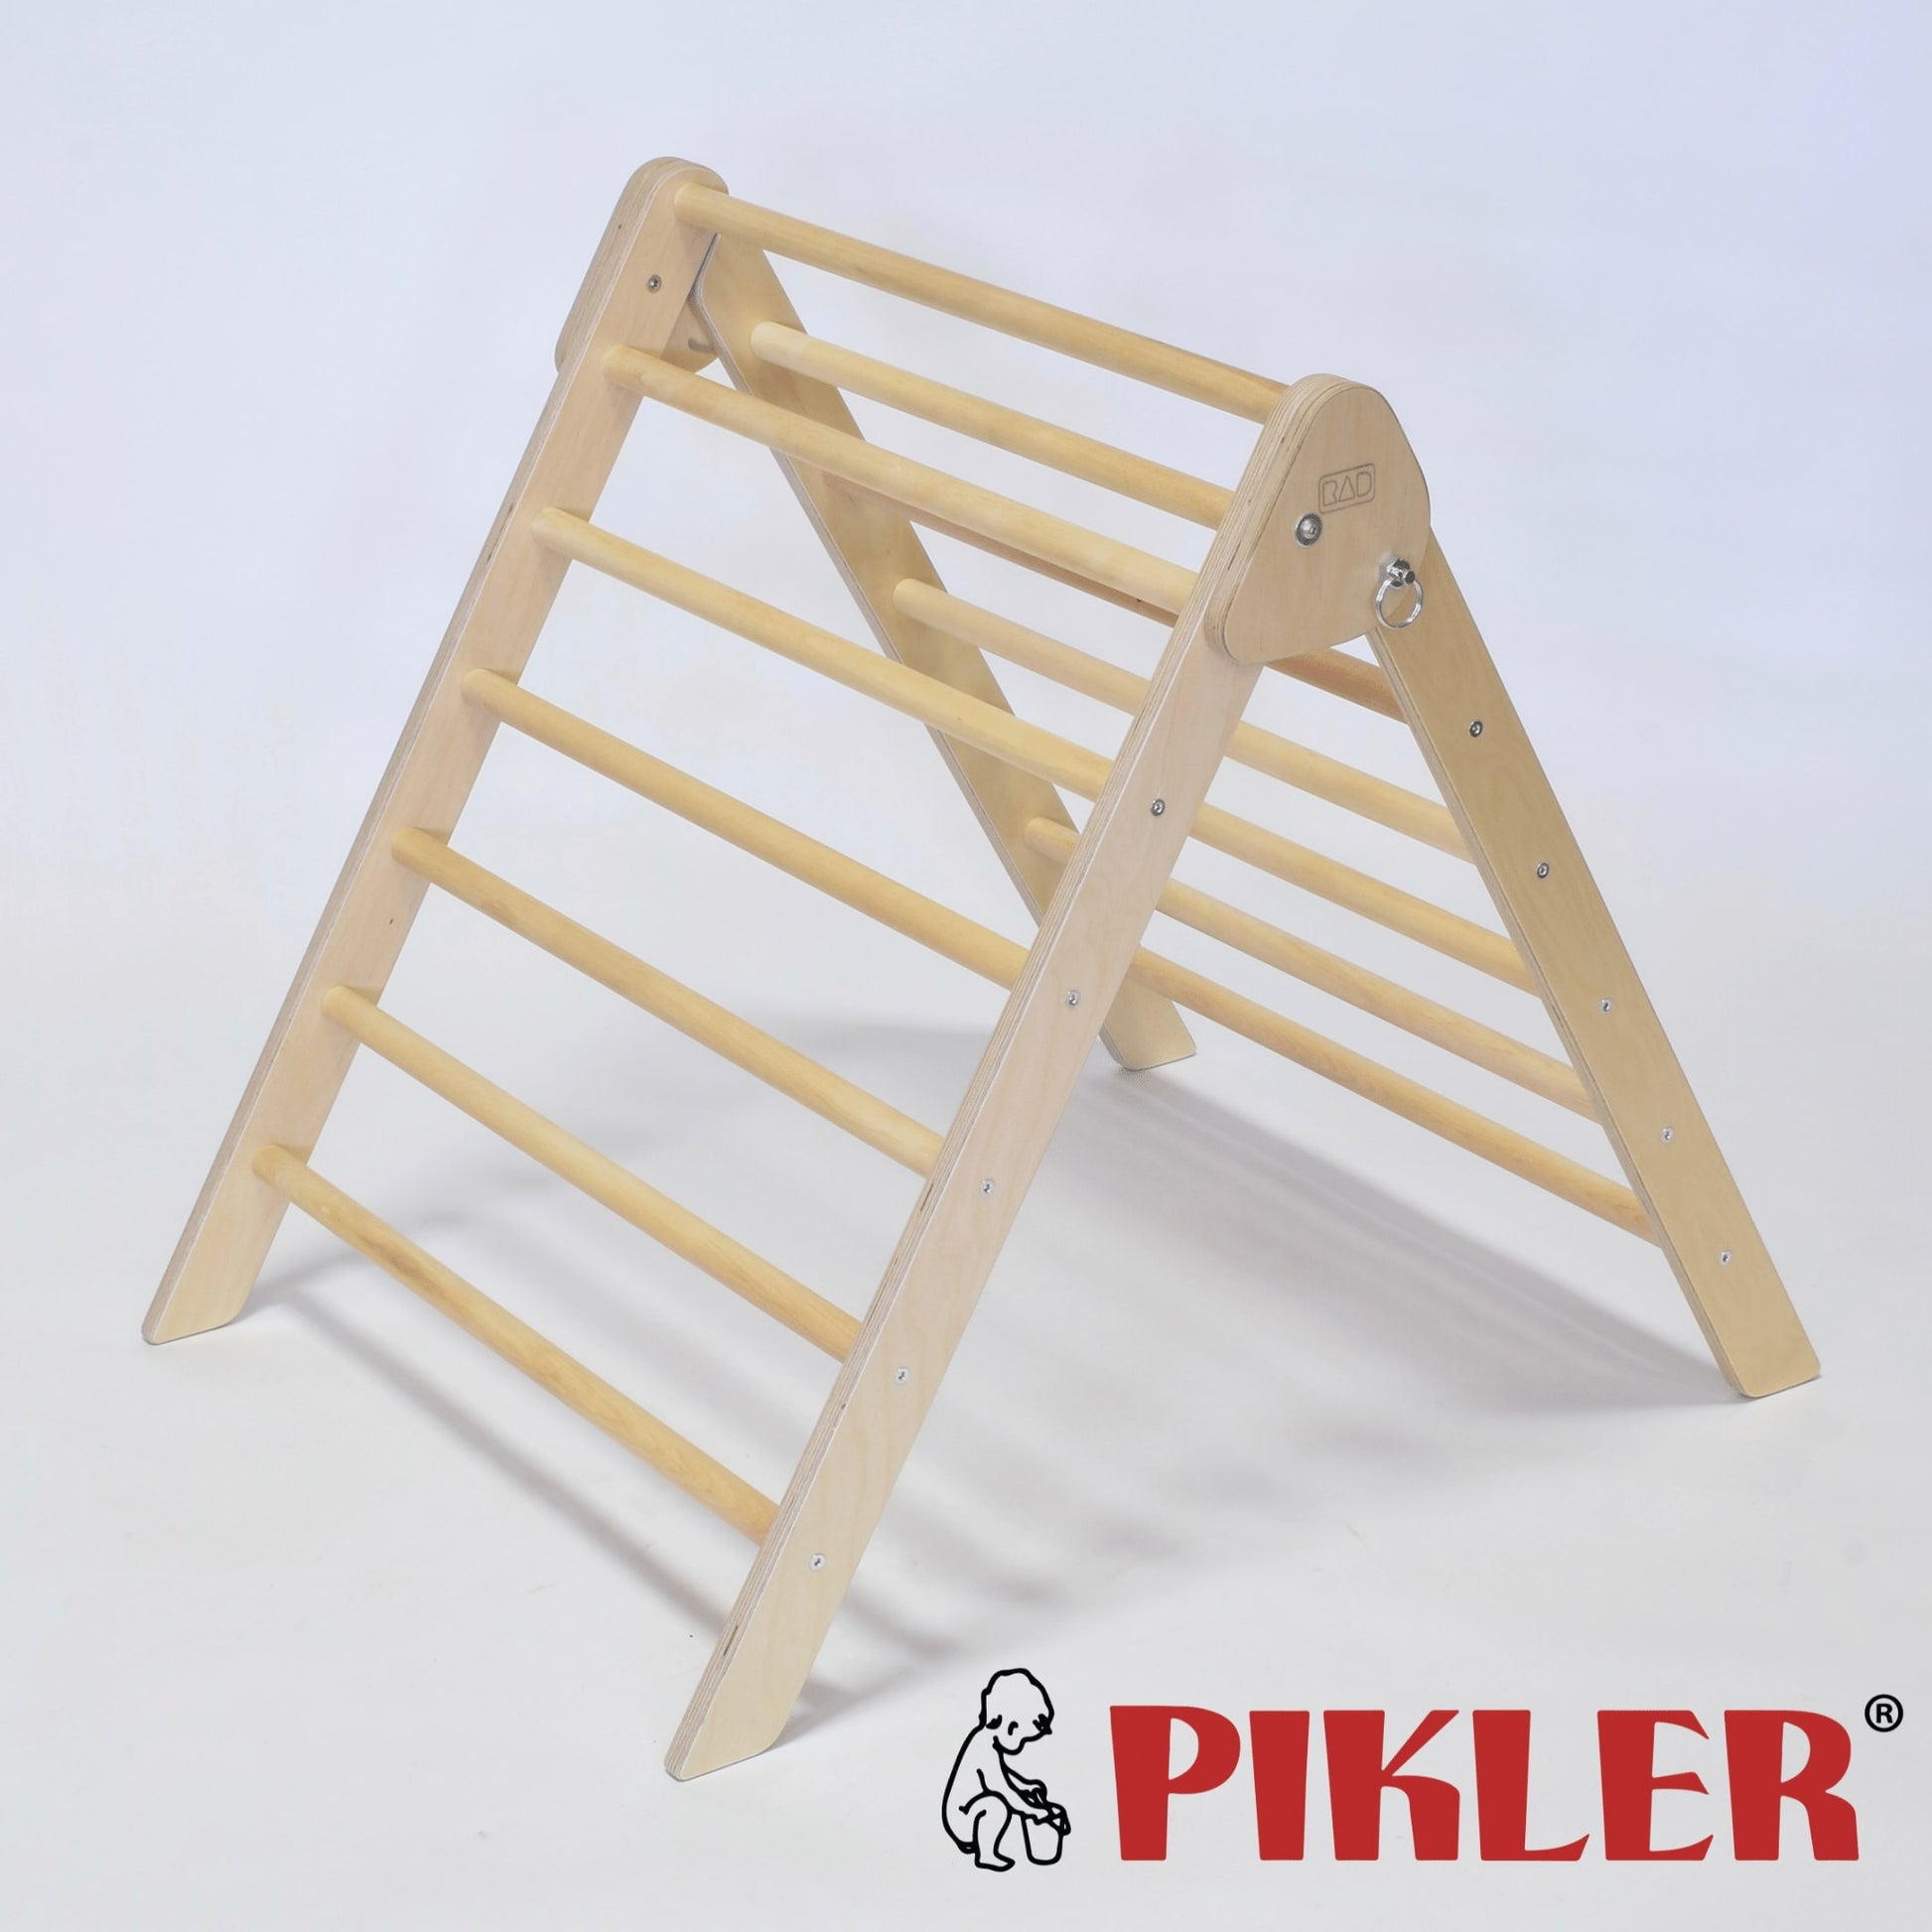 Pikler® Triangle by RAD - The Official Pikler® Climbing Triangle – RAD  Children's Furniture